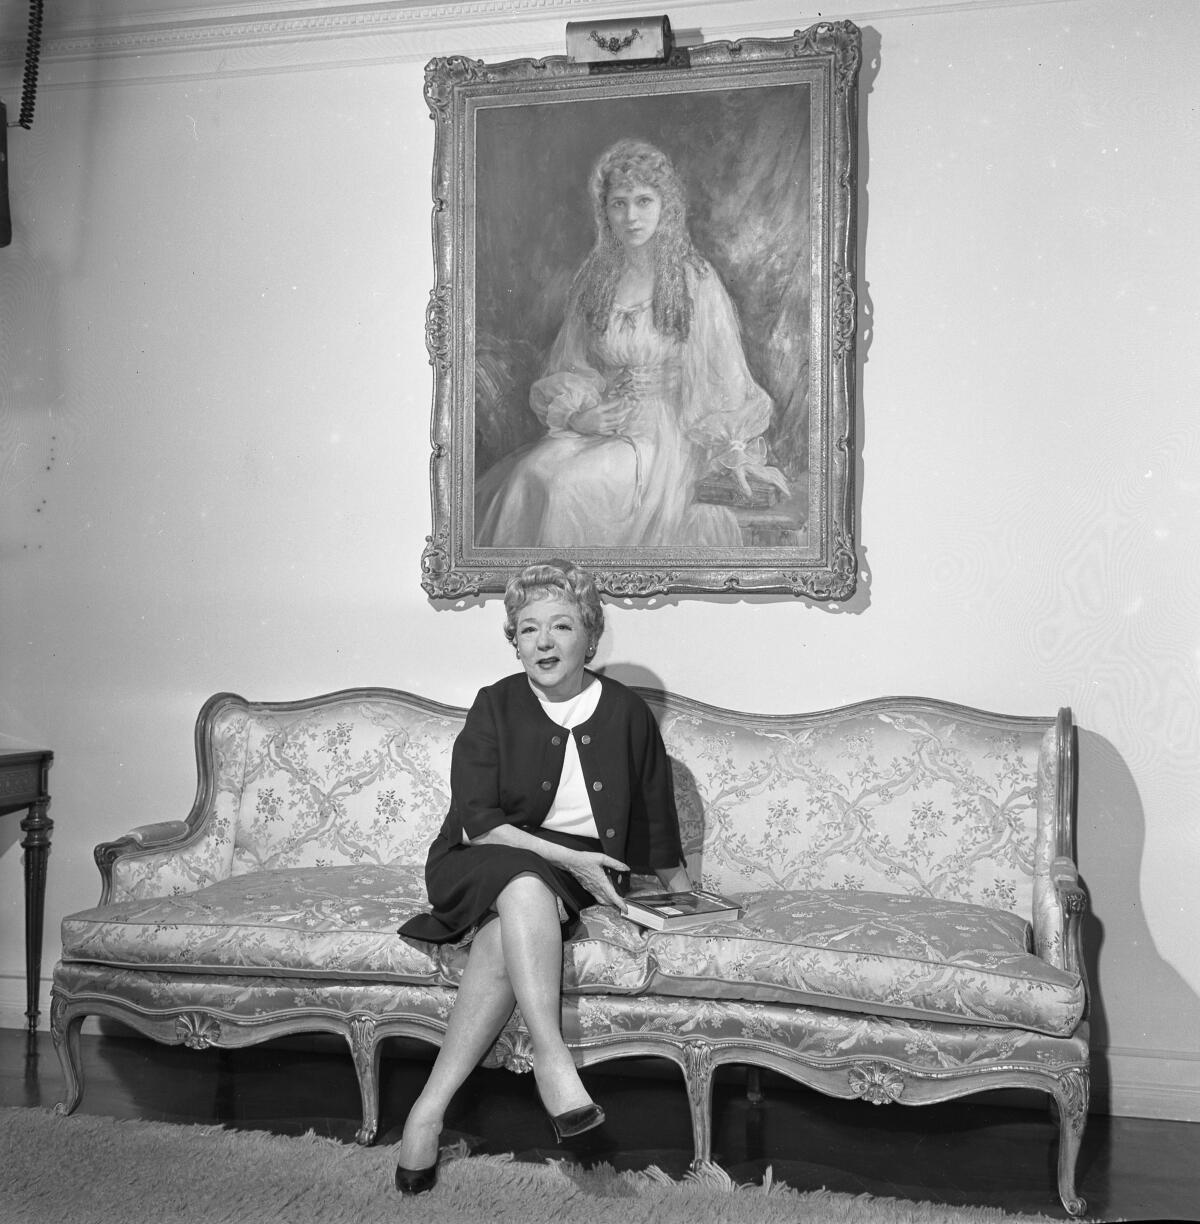 A woman sits on a couch beneath a large framed portrait of a young woman with long curls.